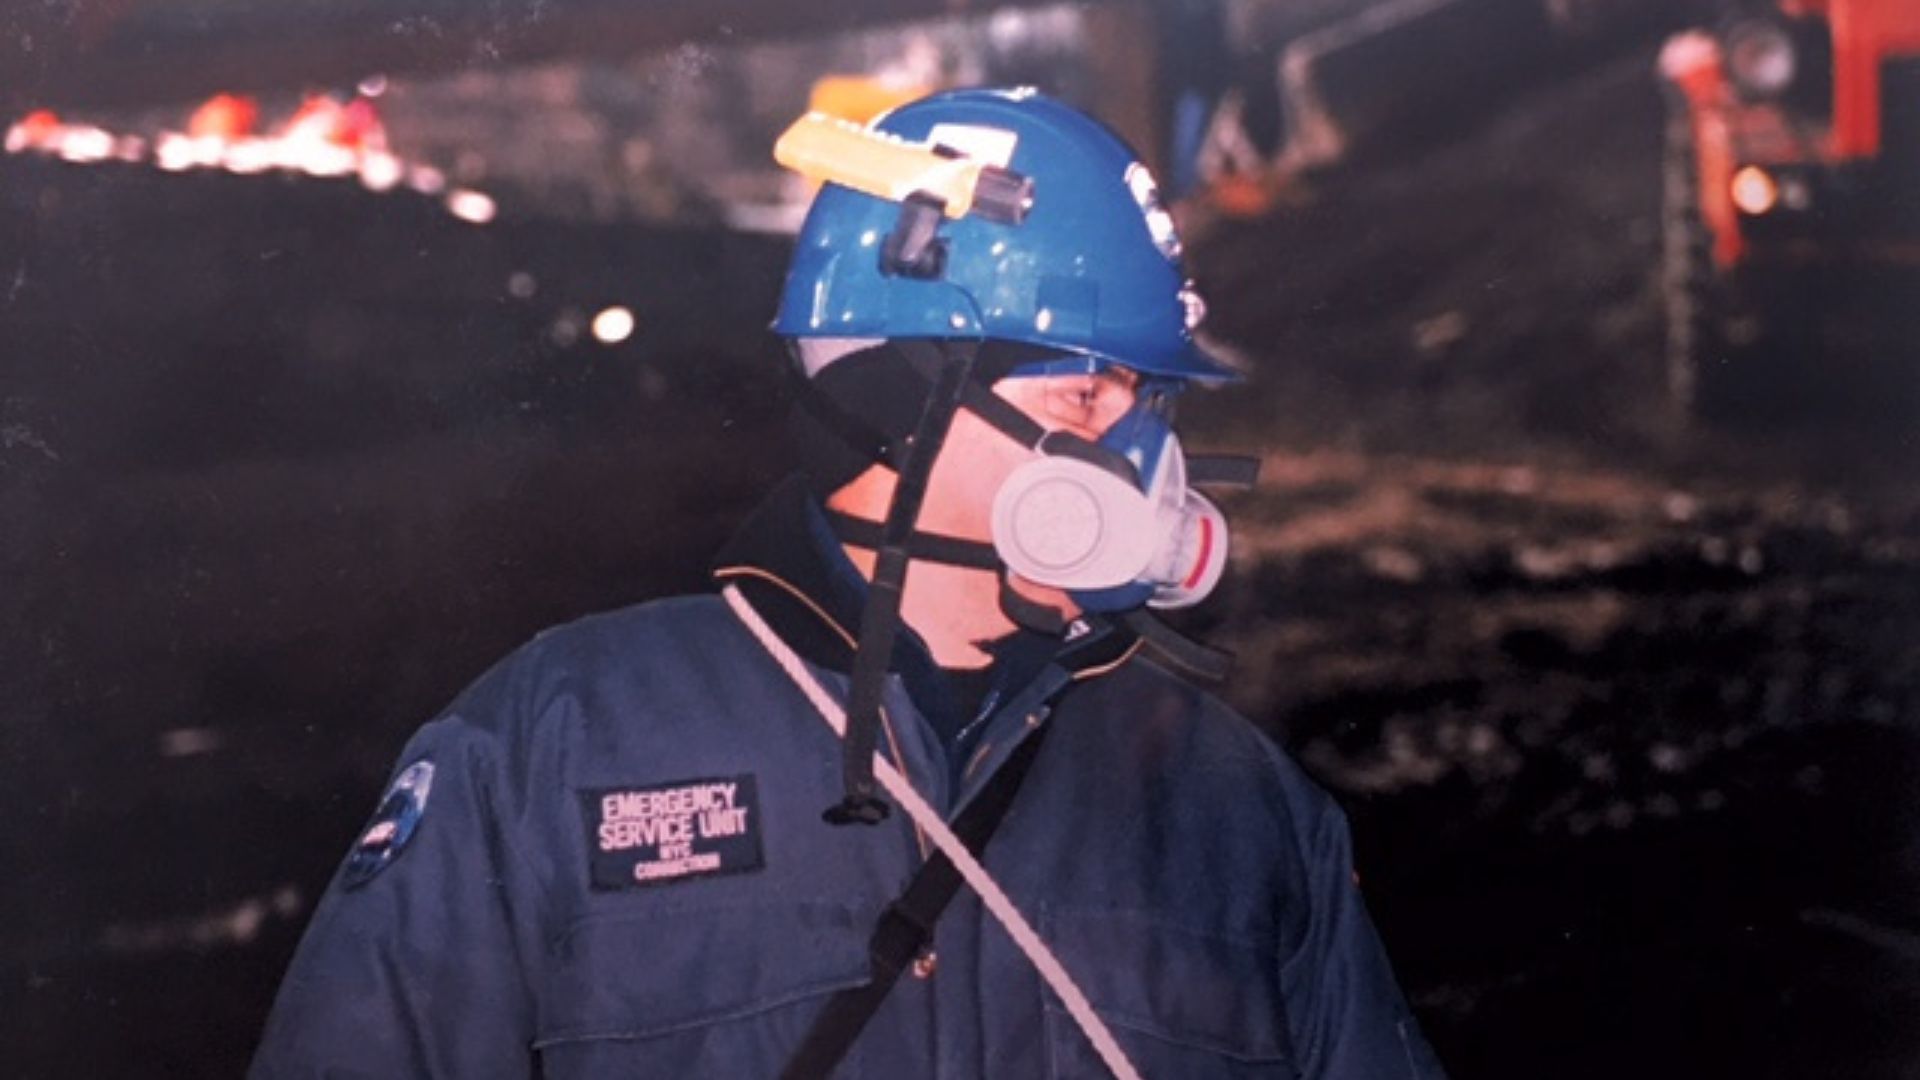 Department of Correction worker with hard hat and protective face mask at Ground Zero